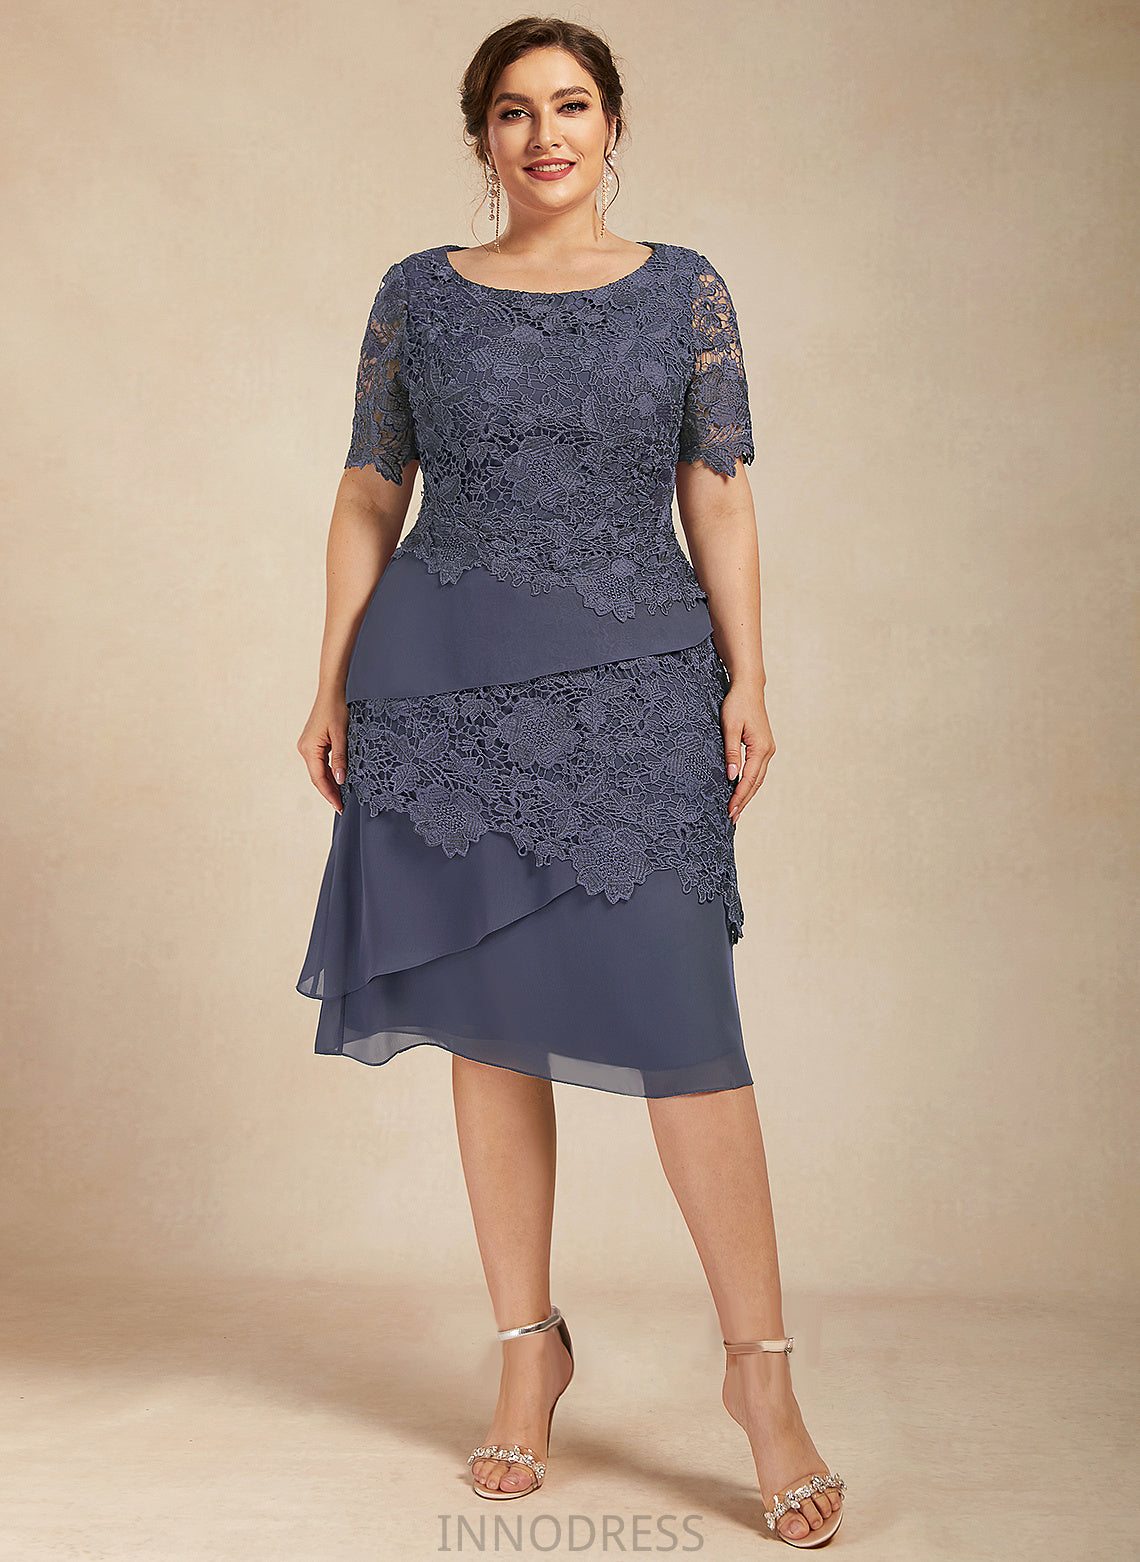 Scoop Bride Chiffon Dress of Sheath/Column Mother of the Bride Dresses the Knee-Length Mother Mignon Lace Neck